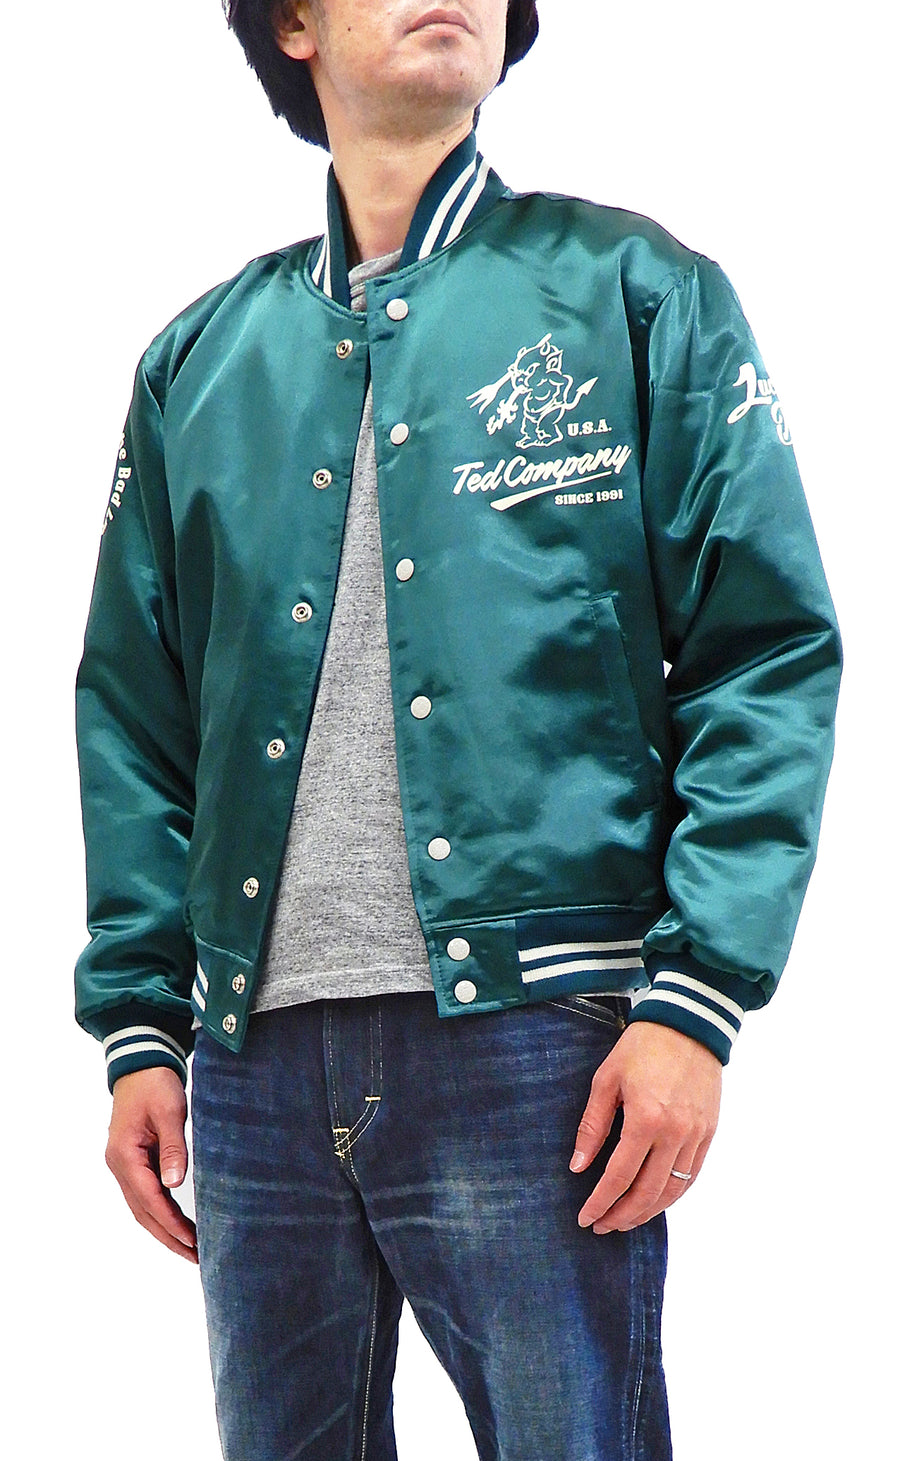 green varsity jacket look  Green varsity jacket, Casual winter outfits,  Baseball jacket outfit